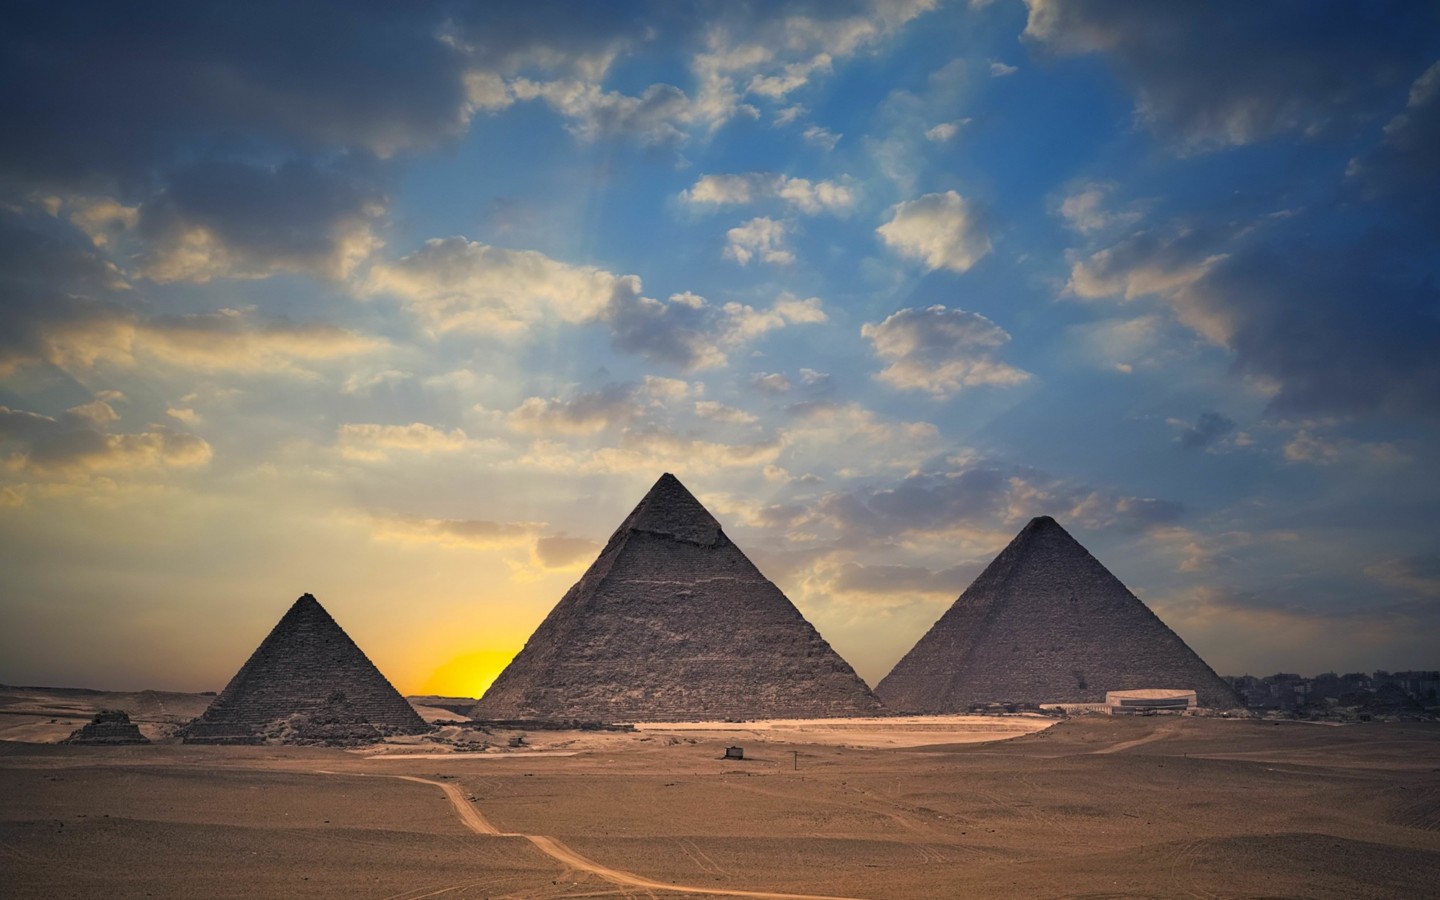 The Great Pyramids of Giza Wallpaper for Desktop 1440x900